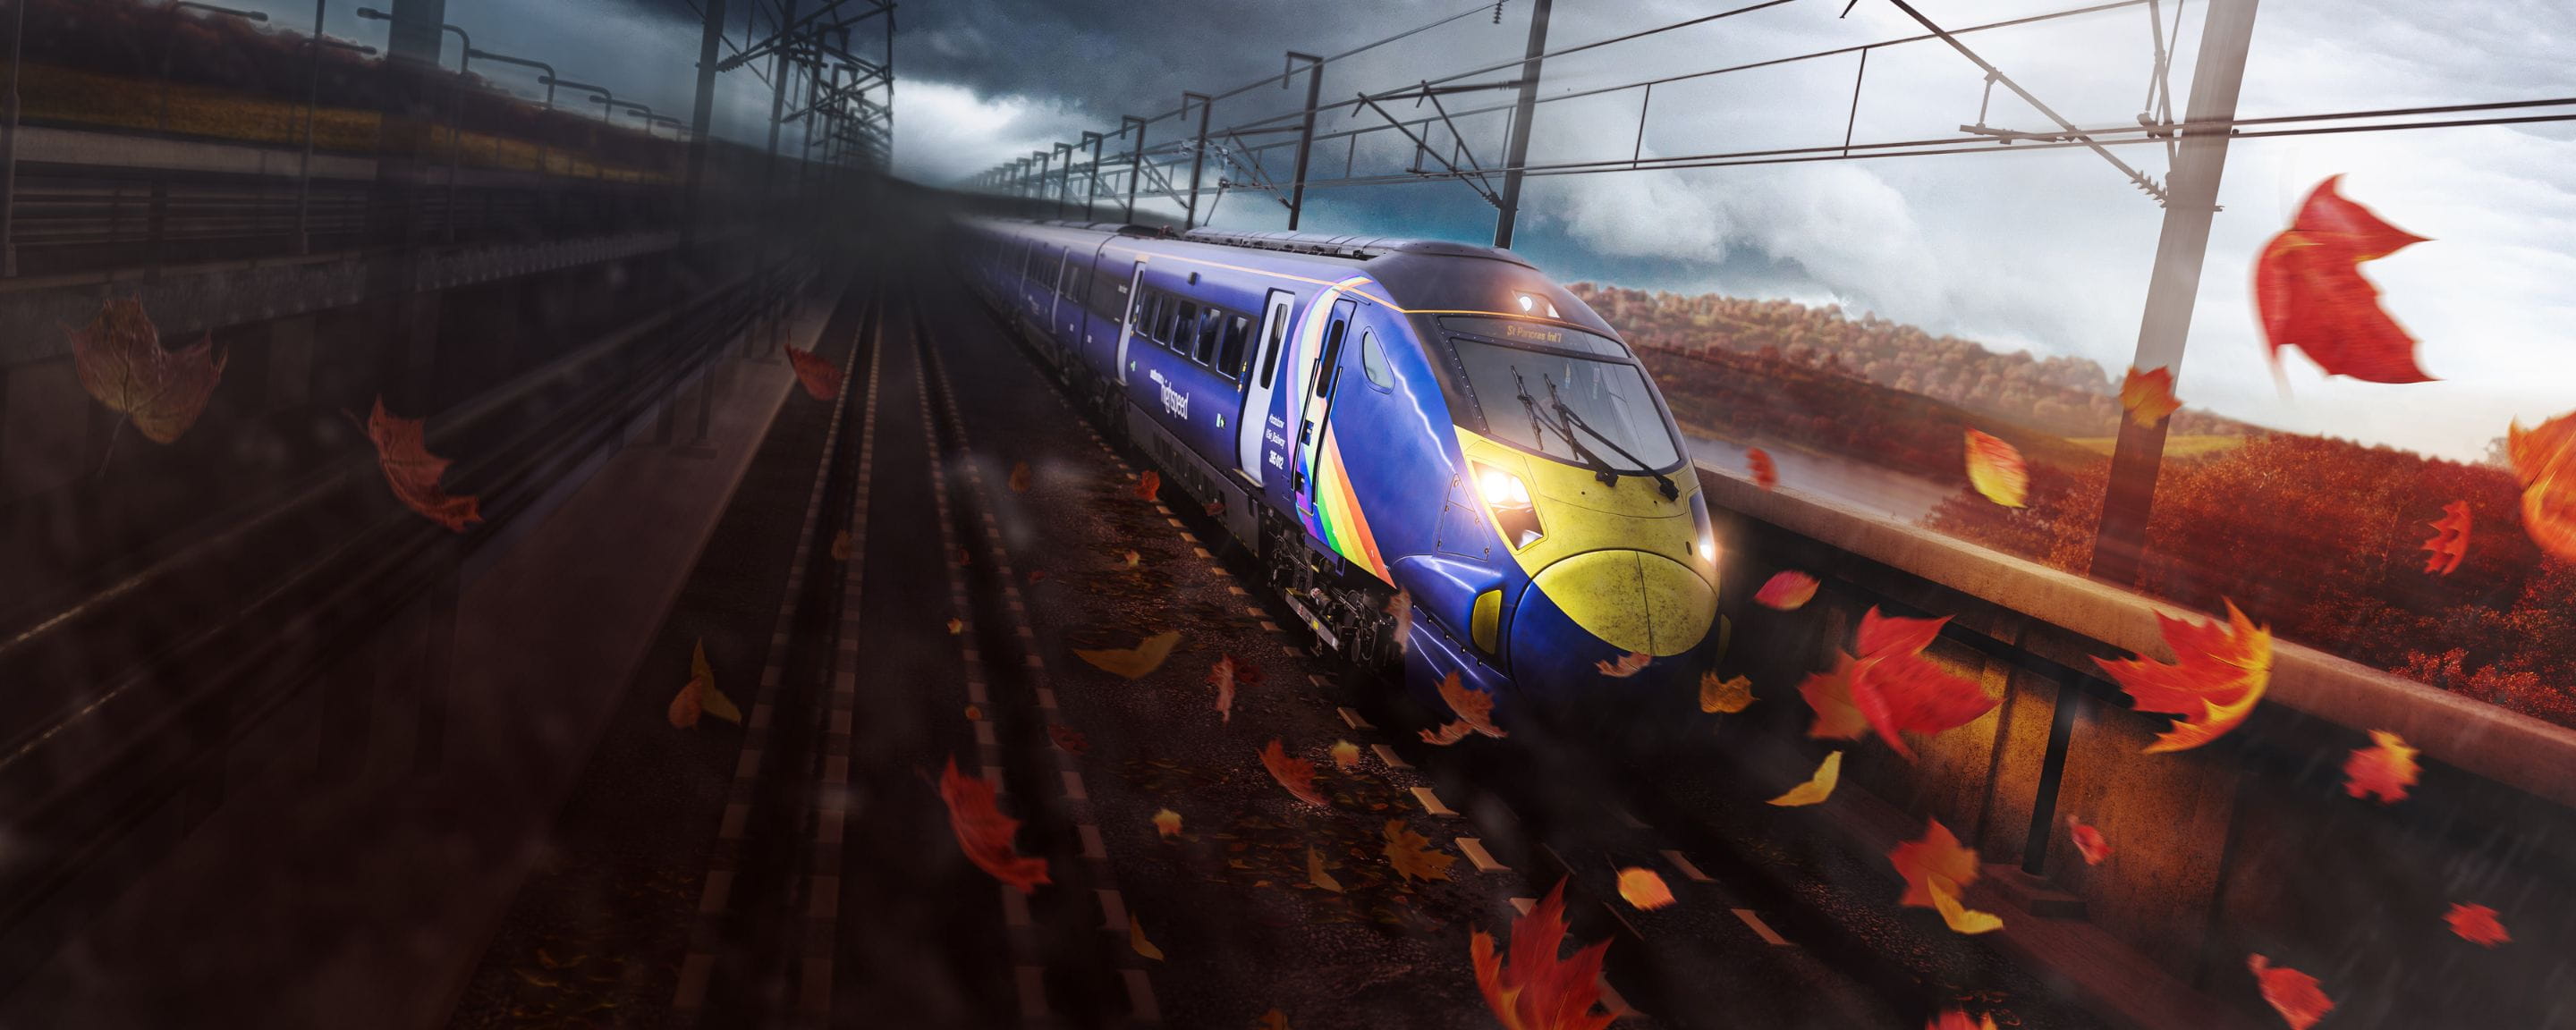 game footage of a Southeastern High Speed train on a track